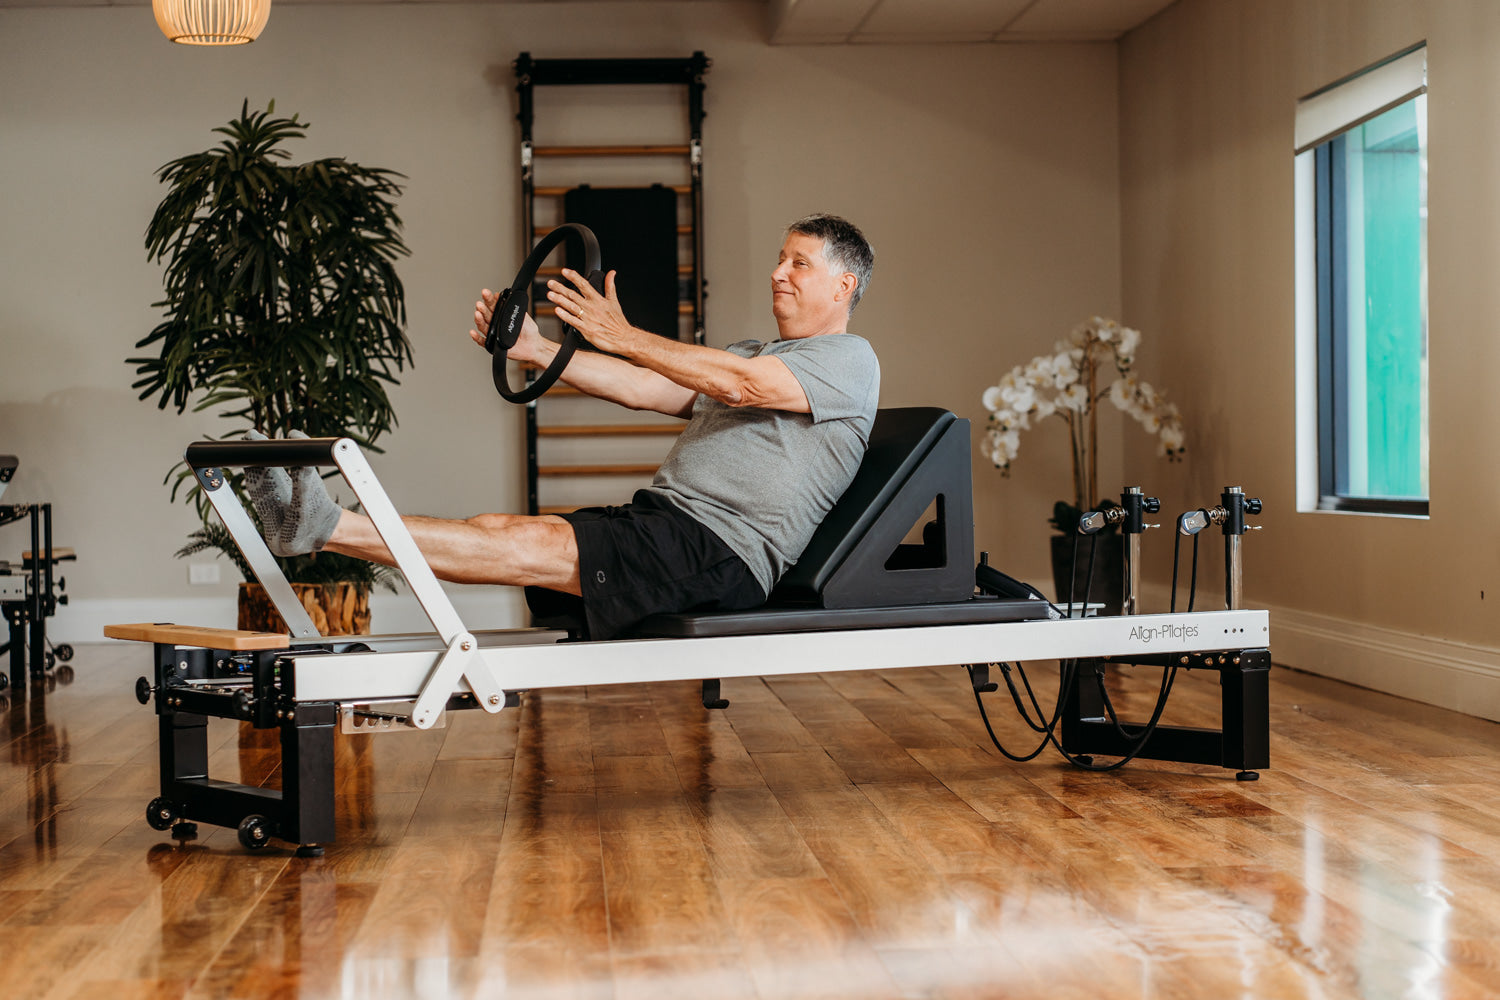 Transform Your Workout Routine with Pilates Reformer Bed: Top